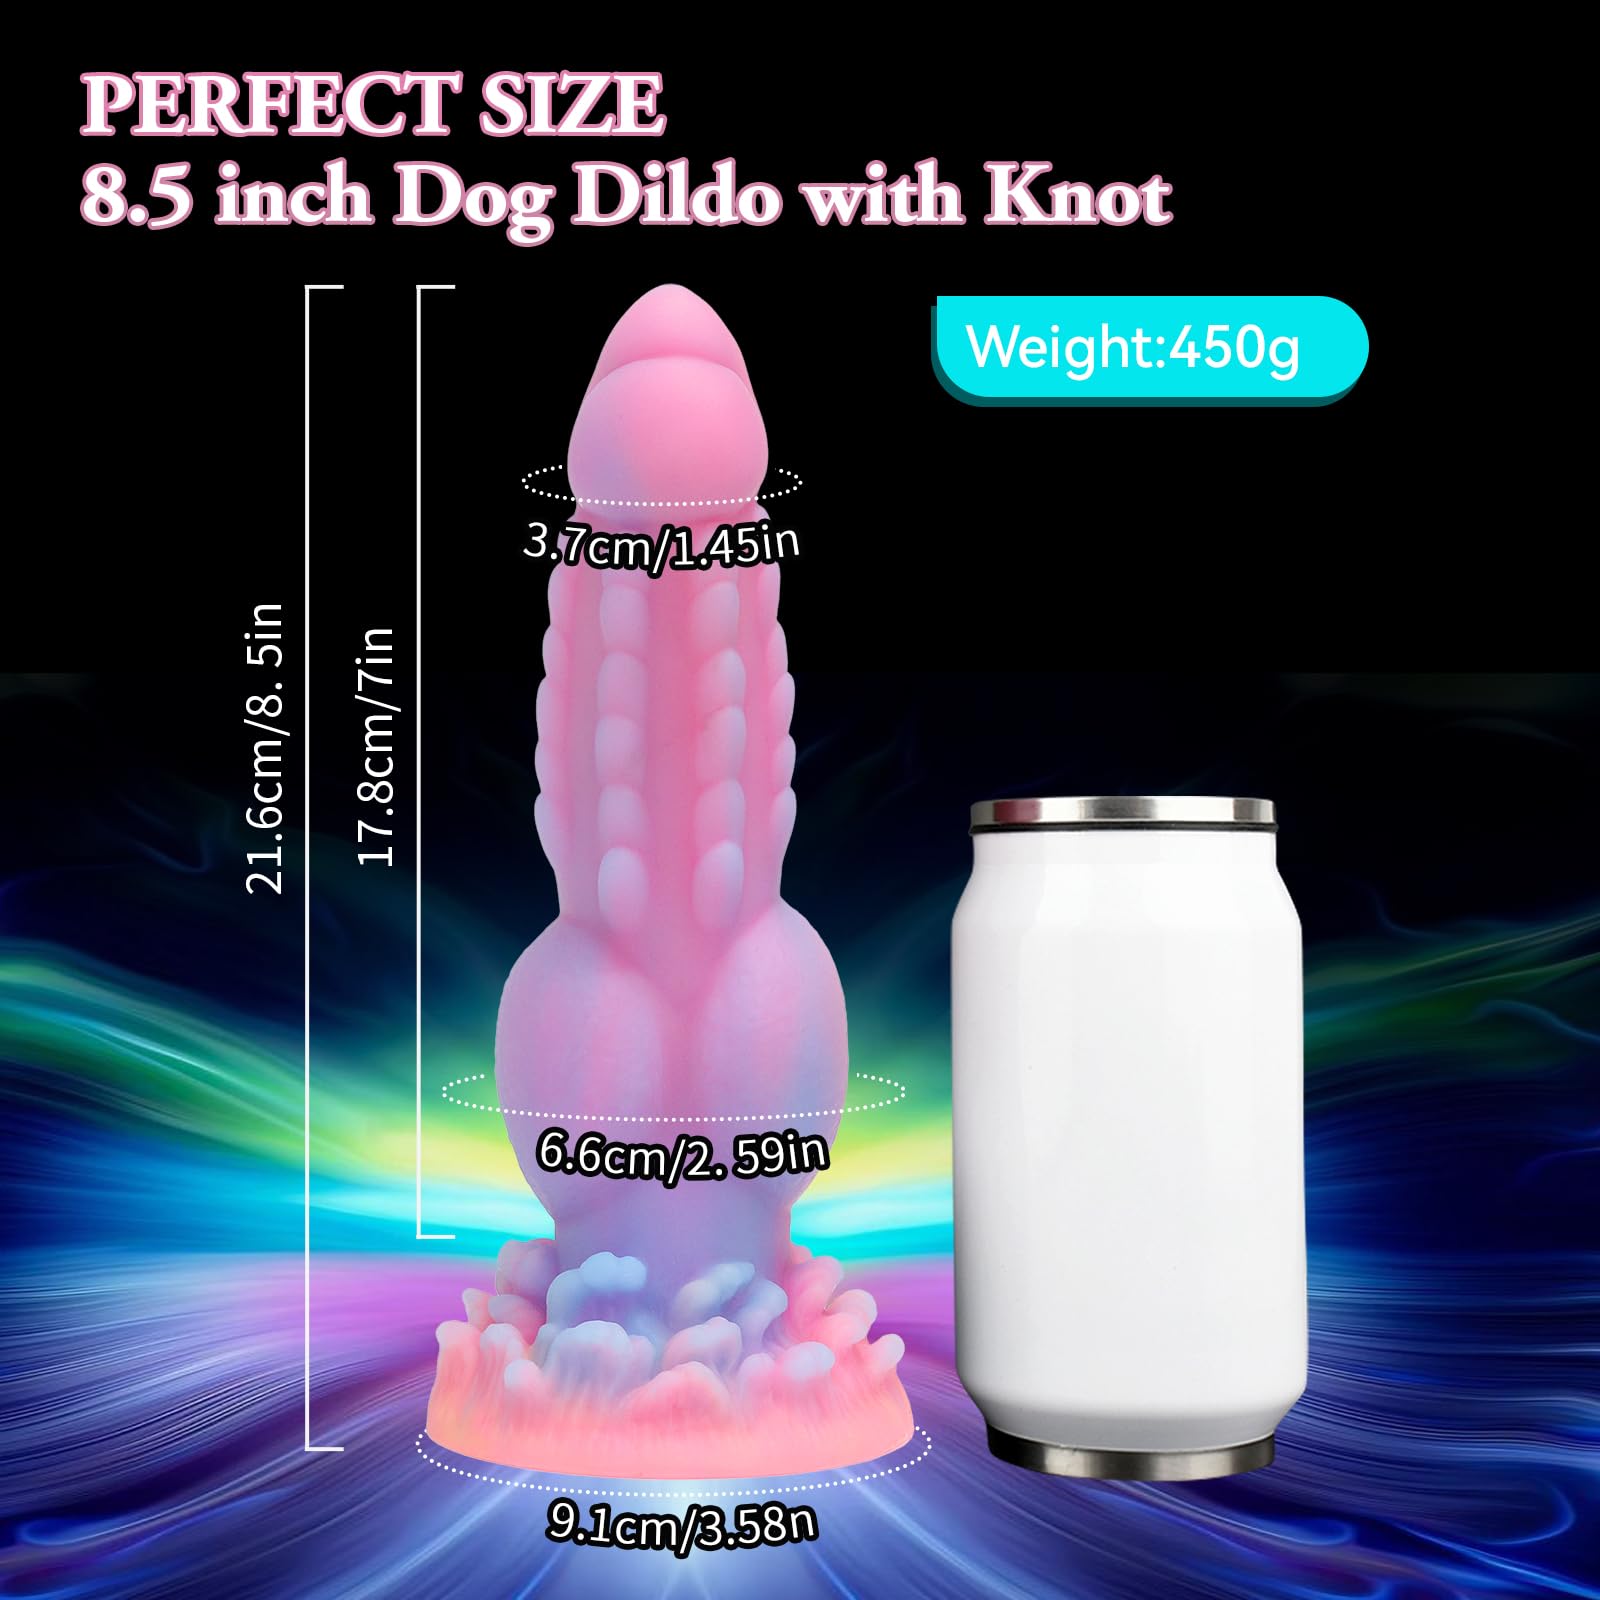 Realistic Dog Dildo, 8.5inch Fantasy Monster Dildos with Knot Luminous Silicone Thick Pink Dildo Anal Toy with Suction Cup for Women Men Couple Strap on Play